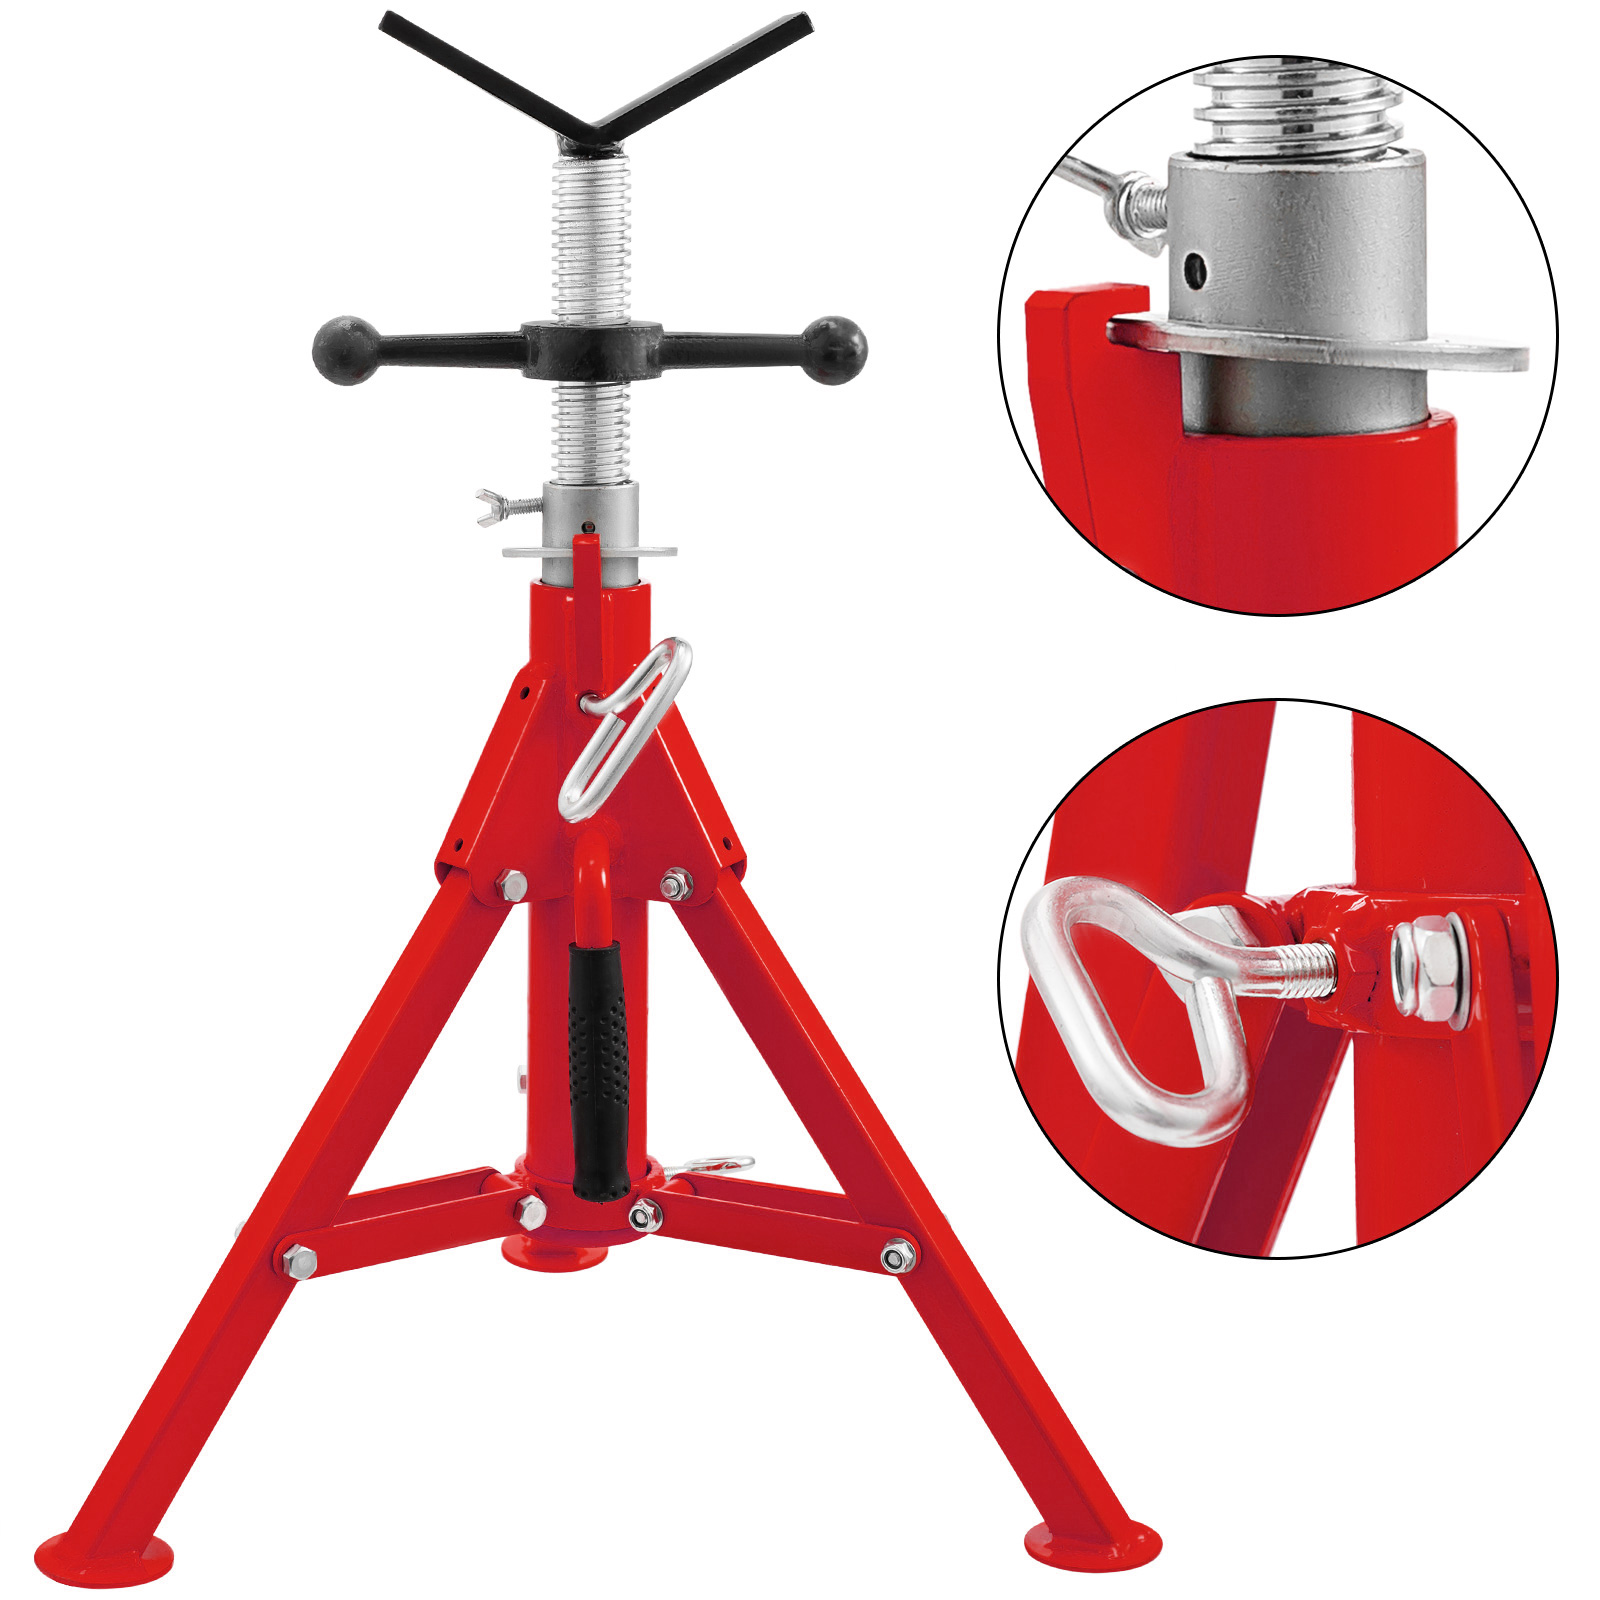 jack stands, welding supplies, pipe fitter tools